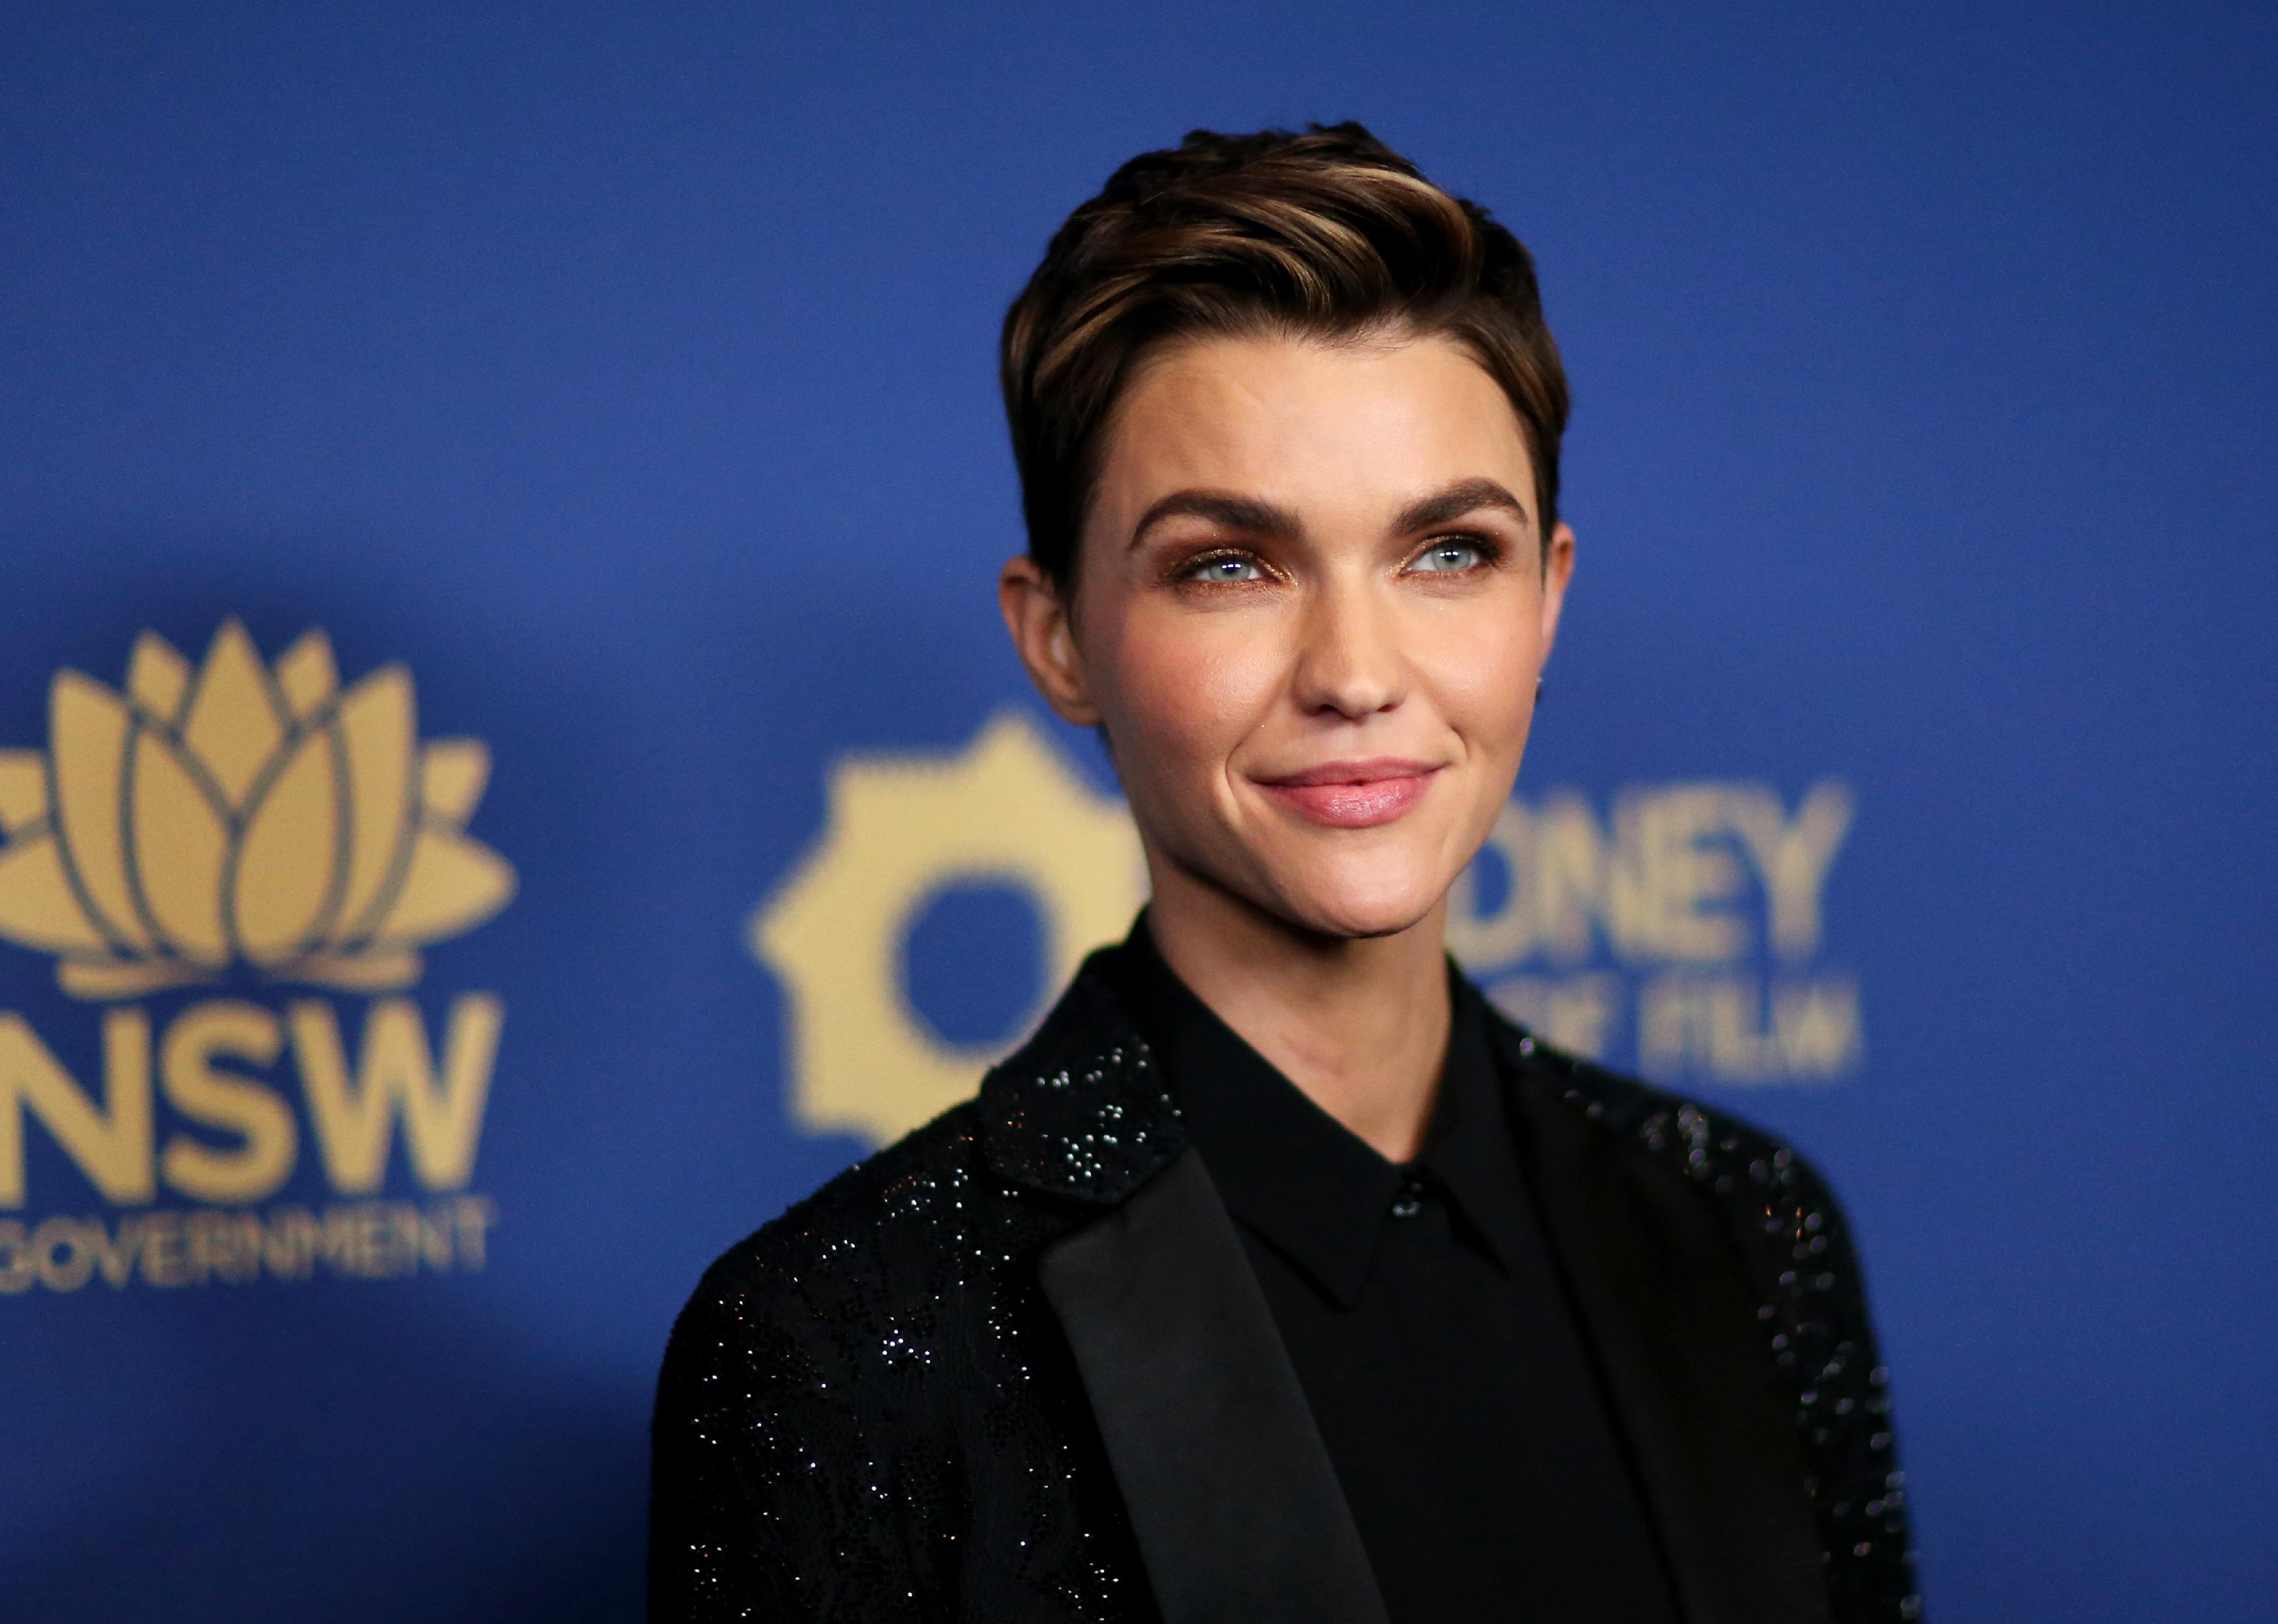 Ruby Rose at InterContinental Los Angeles Century City in Los Angeles, California.